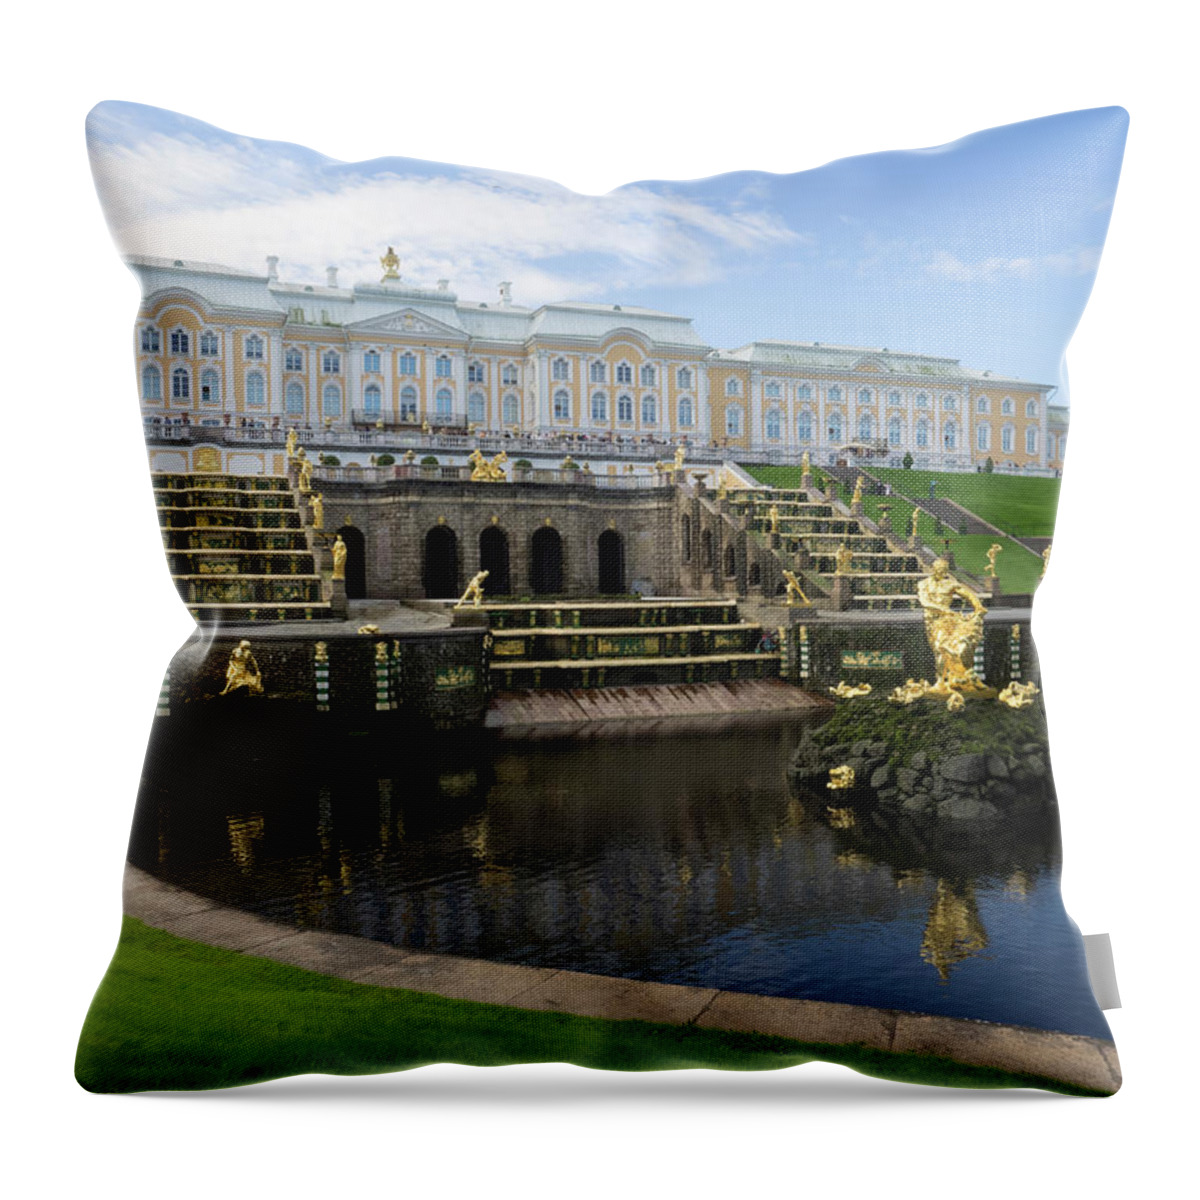 Photography Throw Pillow featuring the photograph Grand Cascade Fountains At Peterhof #4 by Panoramic Images